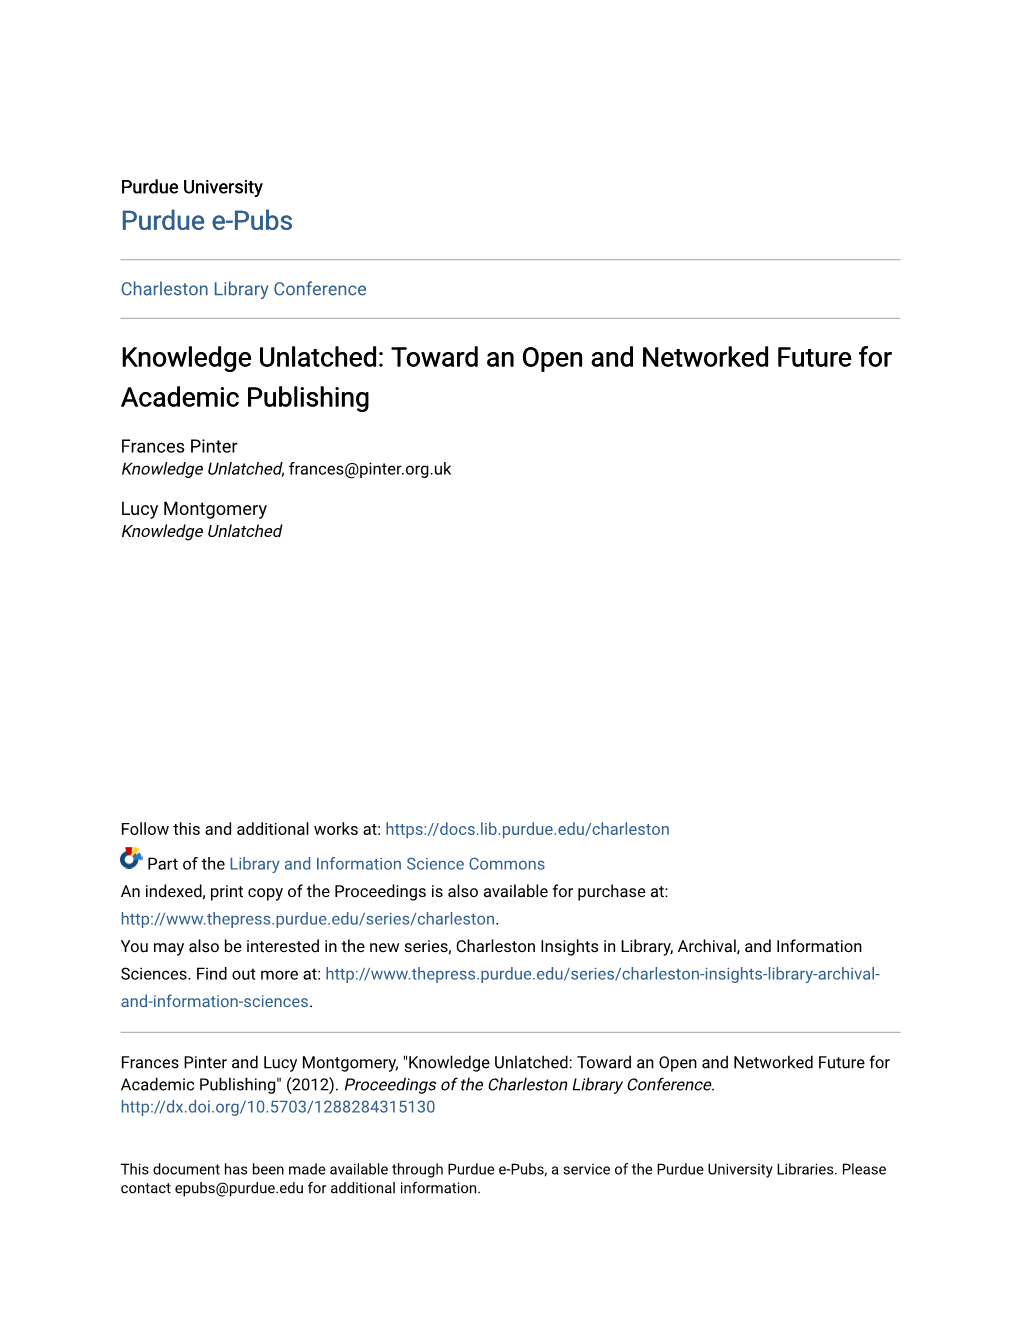 Knowledge Unlatched: Toward an Open and Networked Future for Academic Publishing